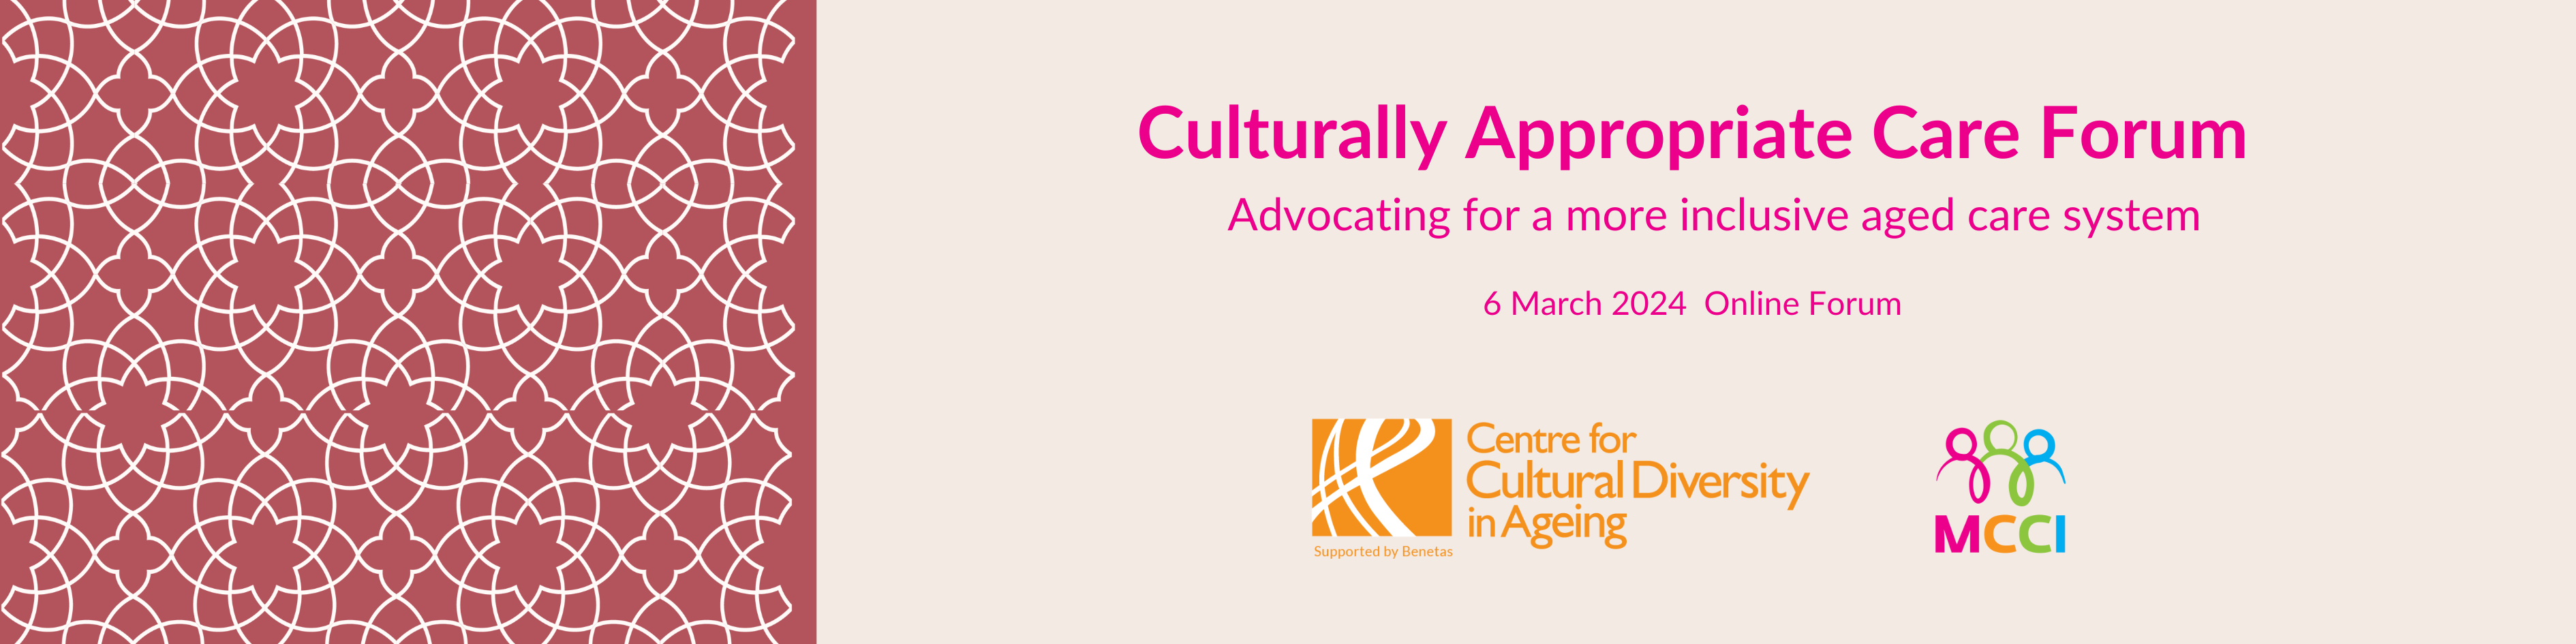 Culturally Appropriate Care Forum Website Banner 2